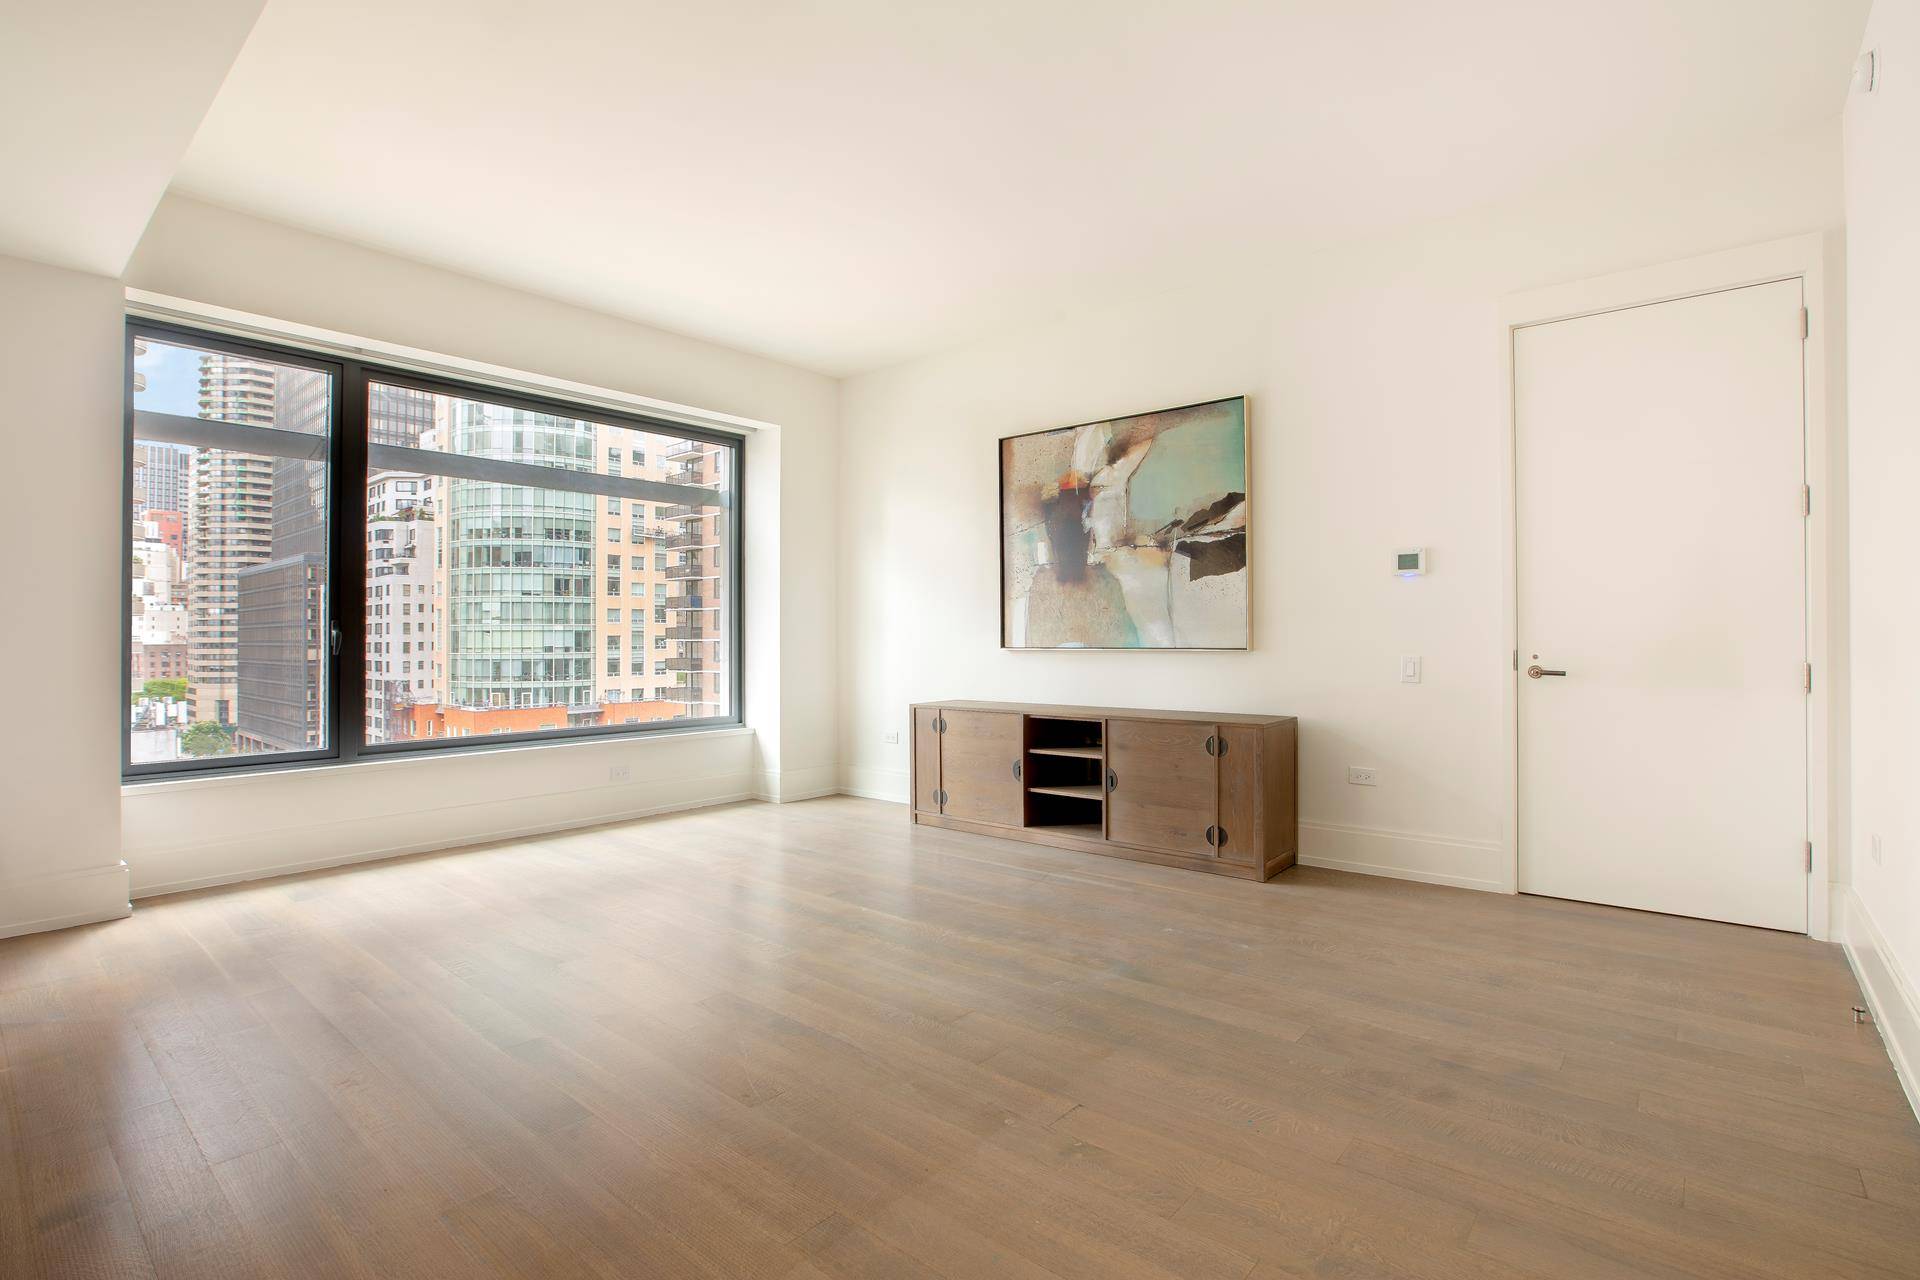 Residence 8A at 301 East 50th Street is a double corner, 1, 447 SF two bedroom, two and a half bath condominium located in Manhattan's Turtle Bay neighborhood.